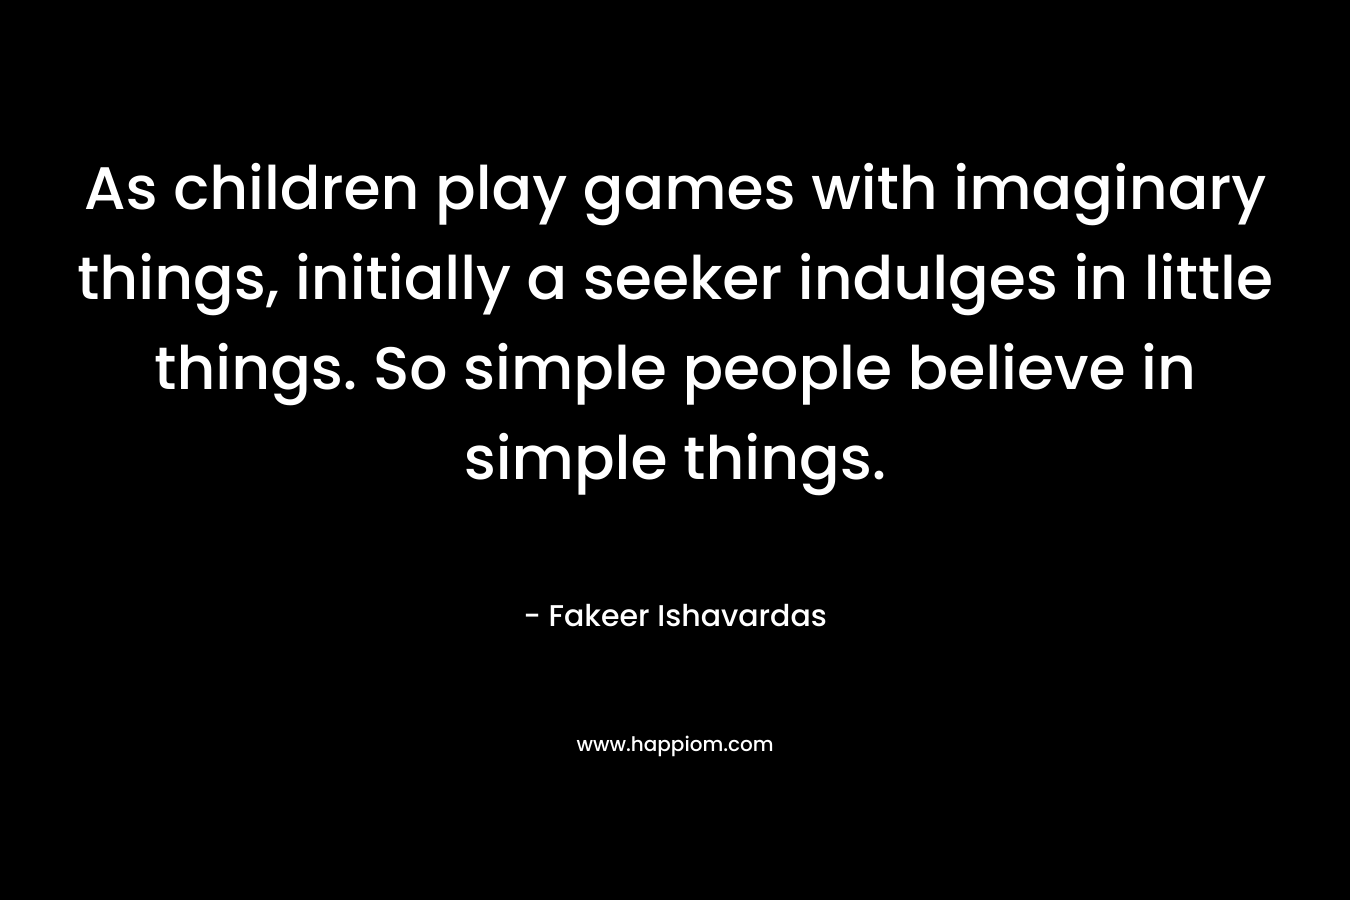 As children play games with imaginary things, initially a seeker indulges in little things. So simple people believe in simple things.